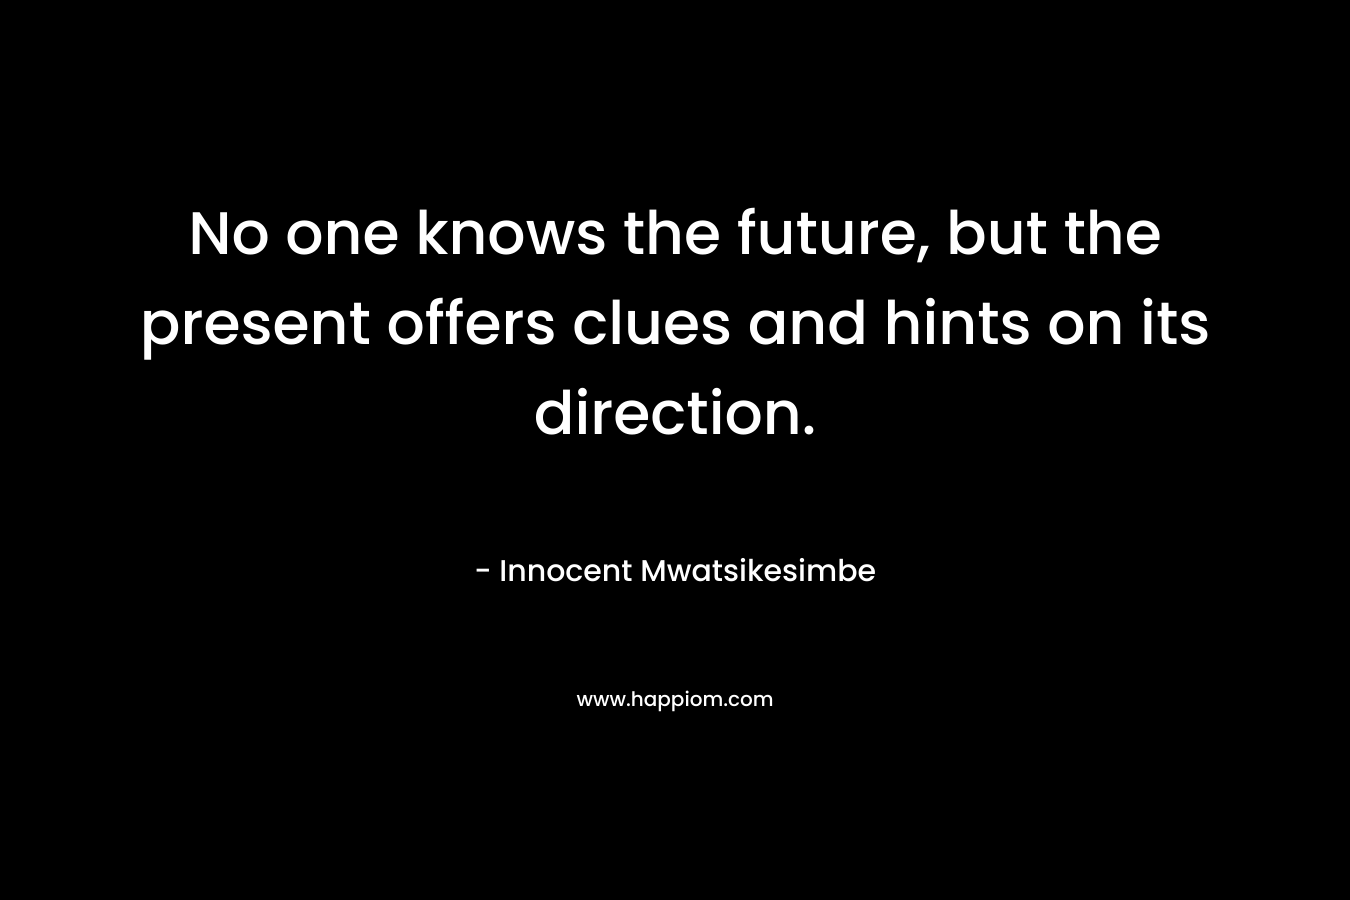 No one knows the future, but the present offers clues and hints on its direction.